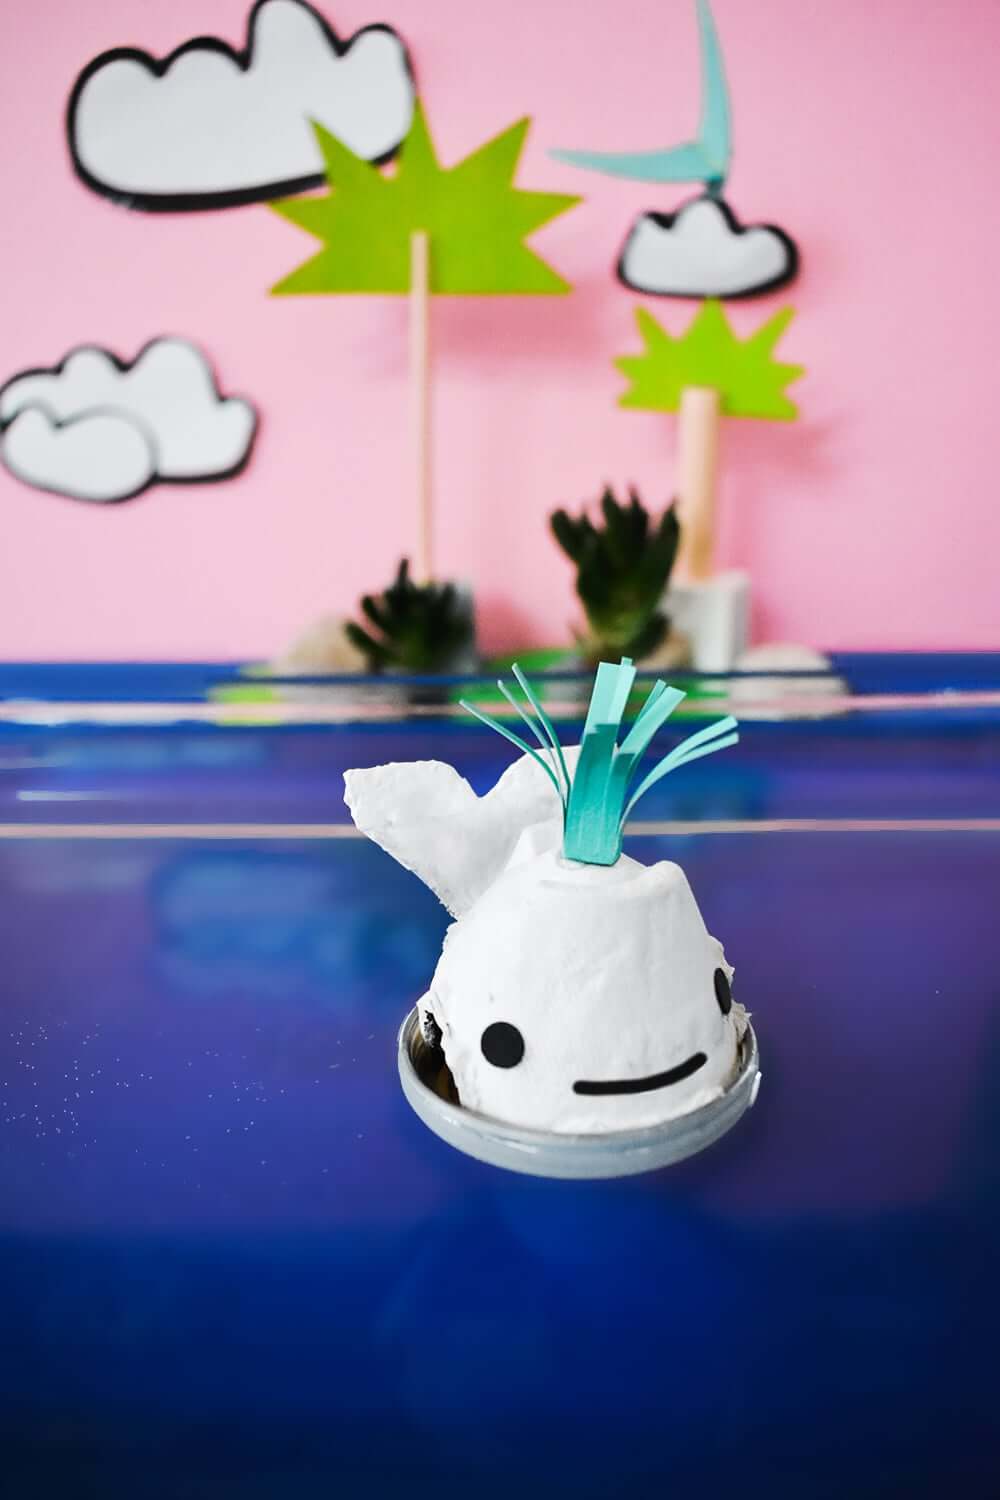 Fun-To-Make Egg carton Cup Floating Whale Craft Idea For Kids